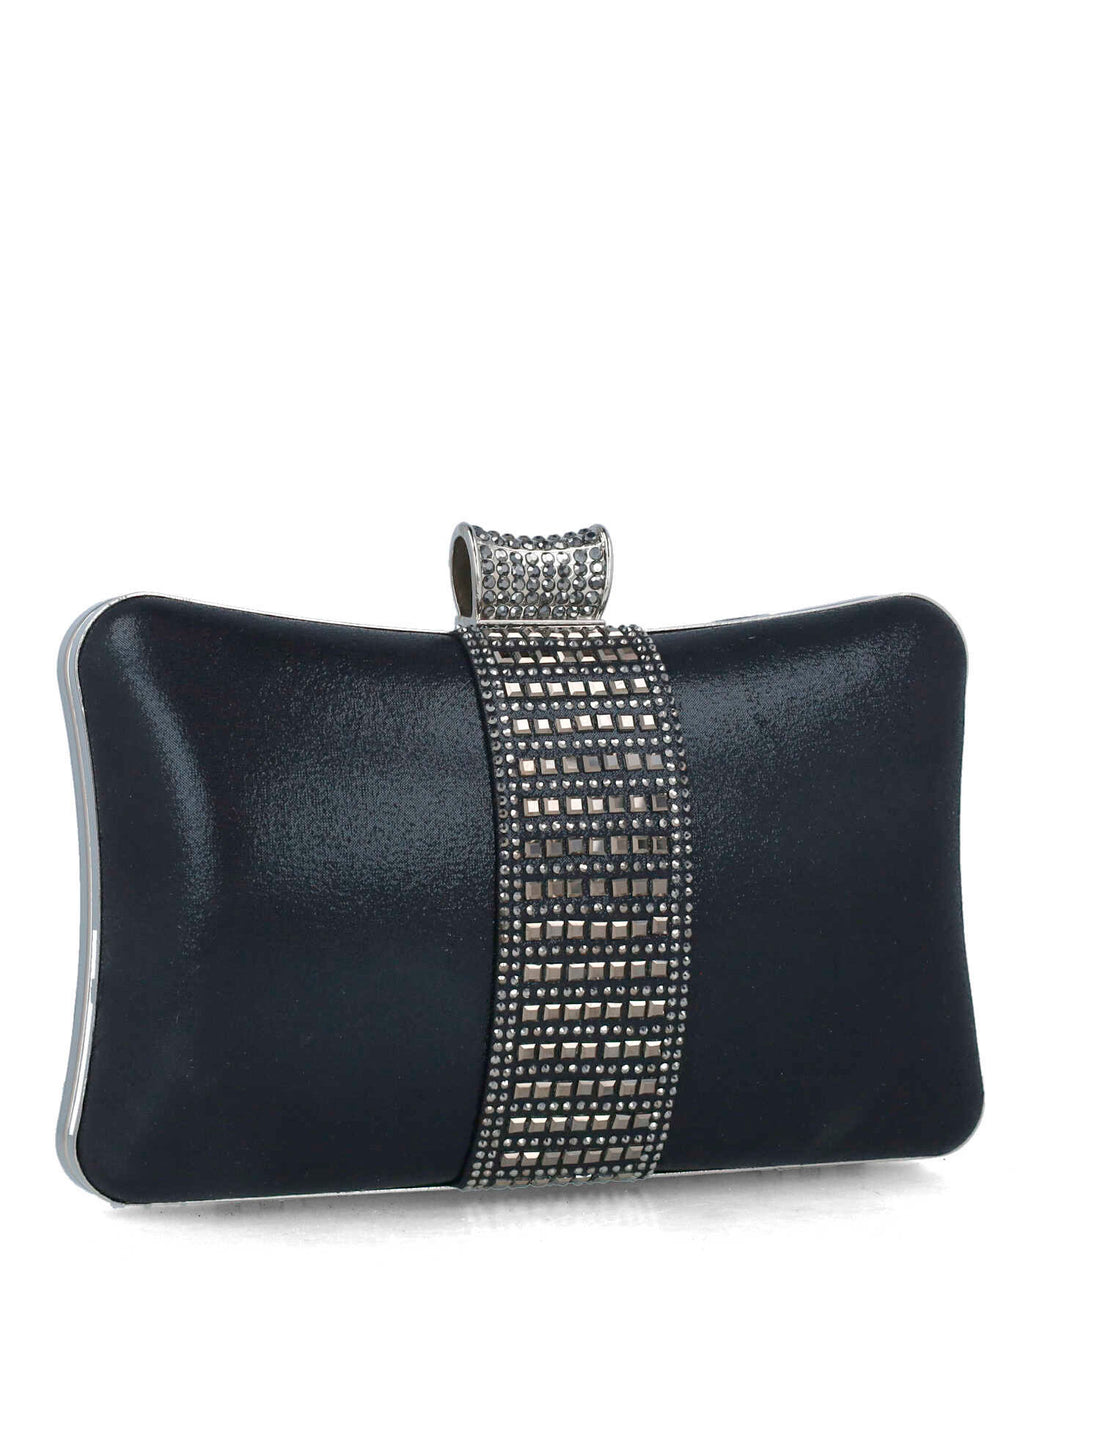 Black Clutch With Embellishment_85498_01_02